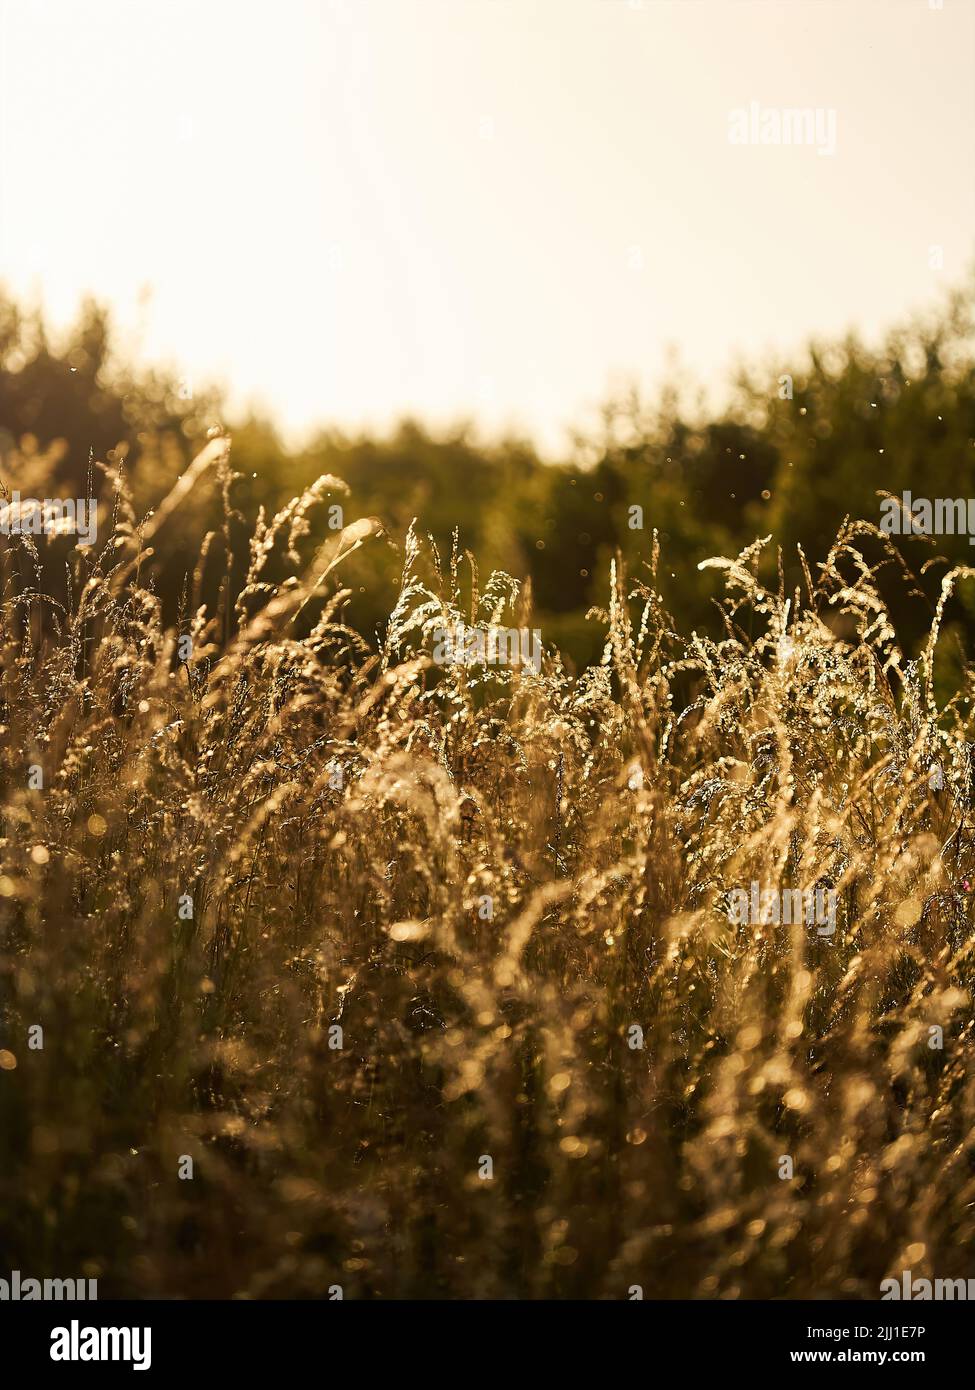 A golden countryside sunset sky seen through the waving, wind-blown stalks of long, feathery grass, with bright spots of insects in flight. Stock Photo